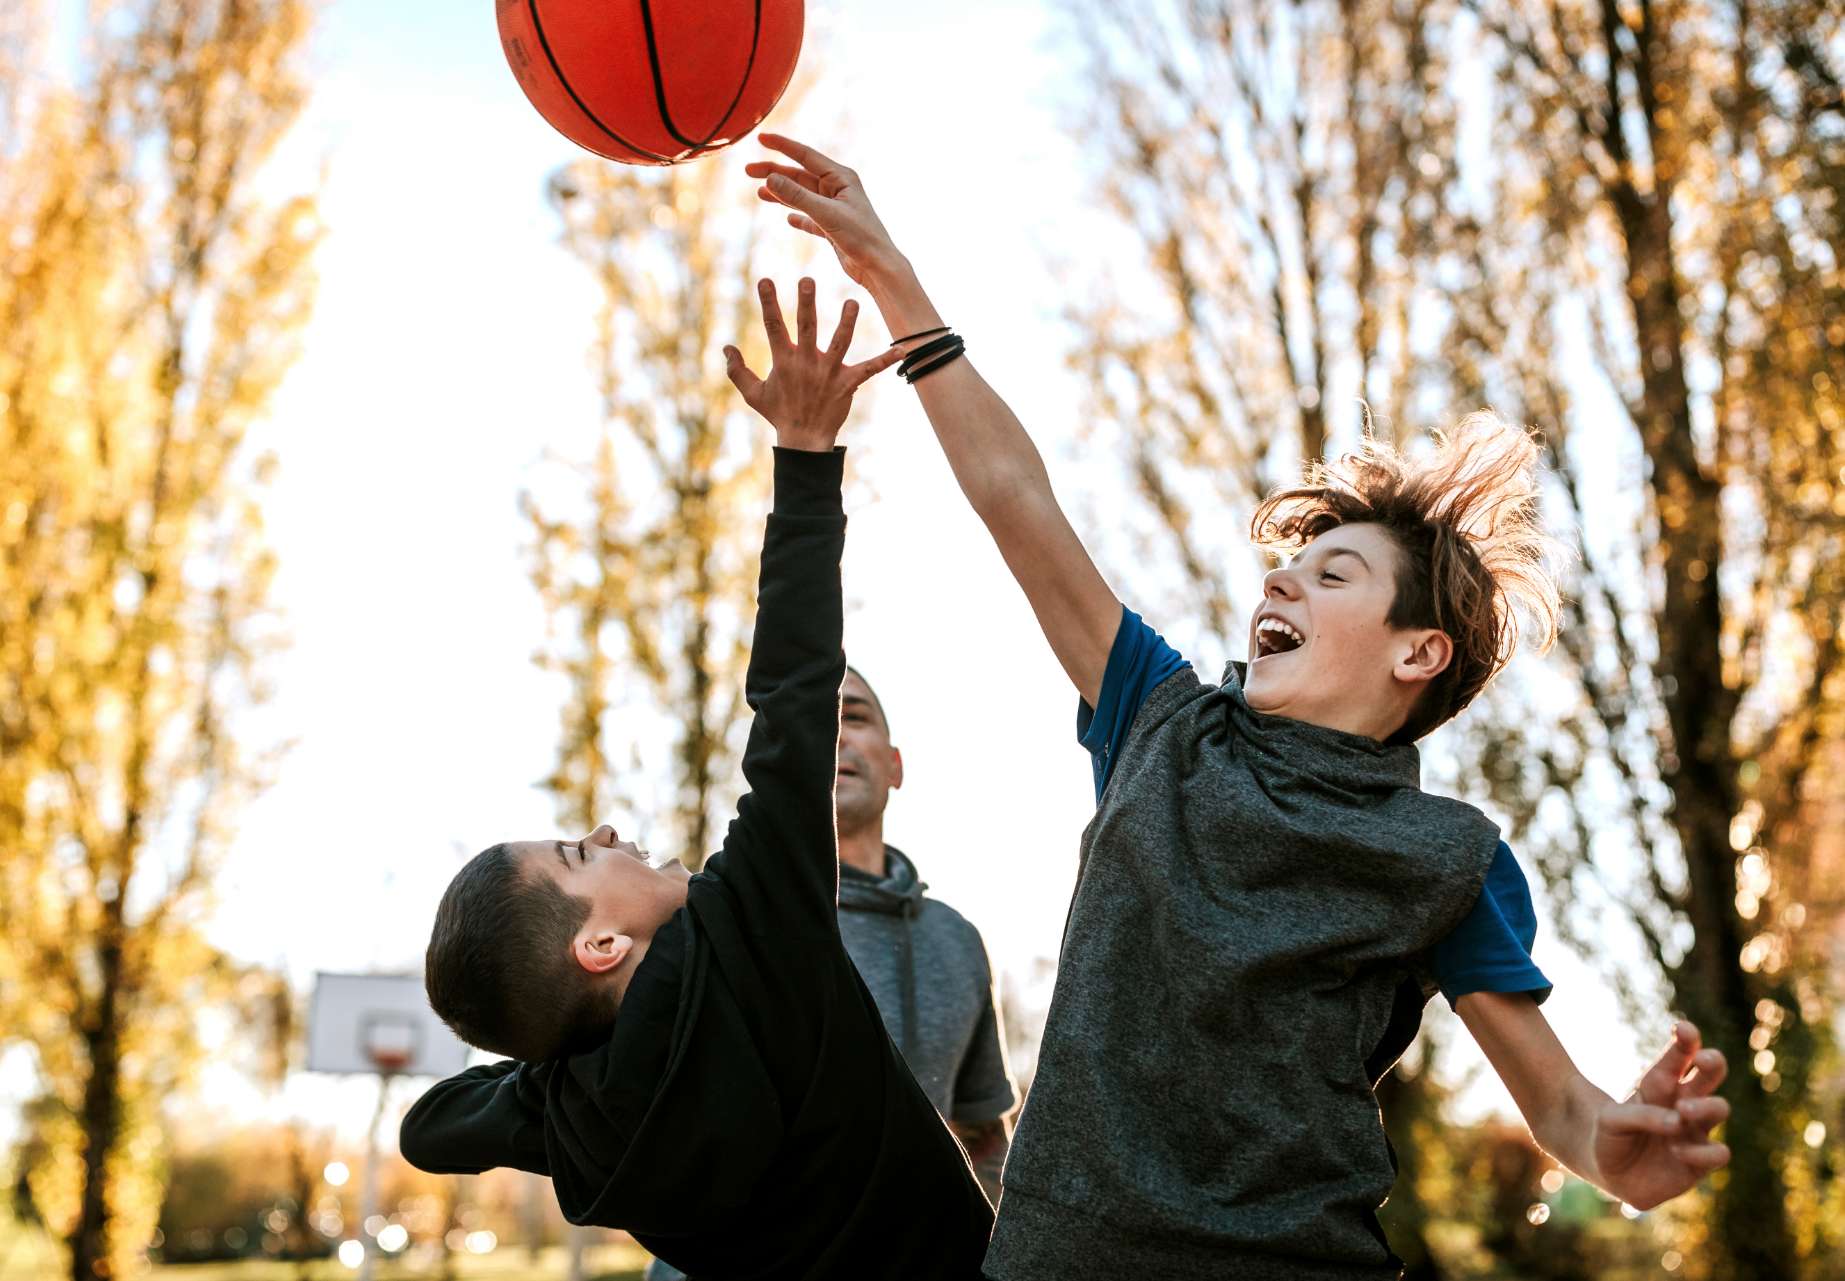 A candid photo of a father and his two sons play basketball at a local court in their neighbourhood. The two young boys are mid-jump trying to reach the ball.